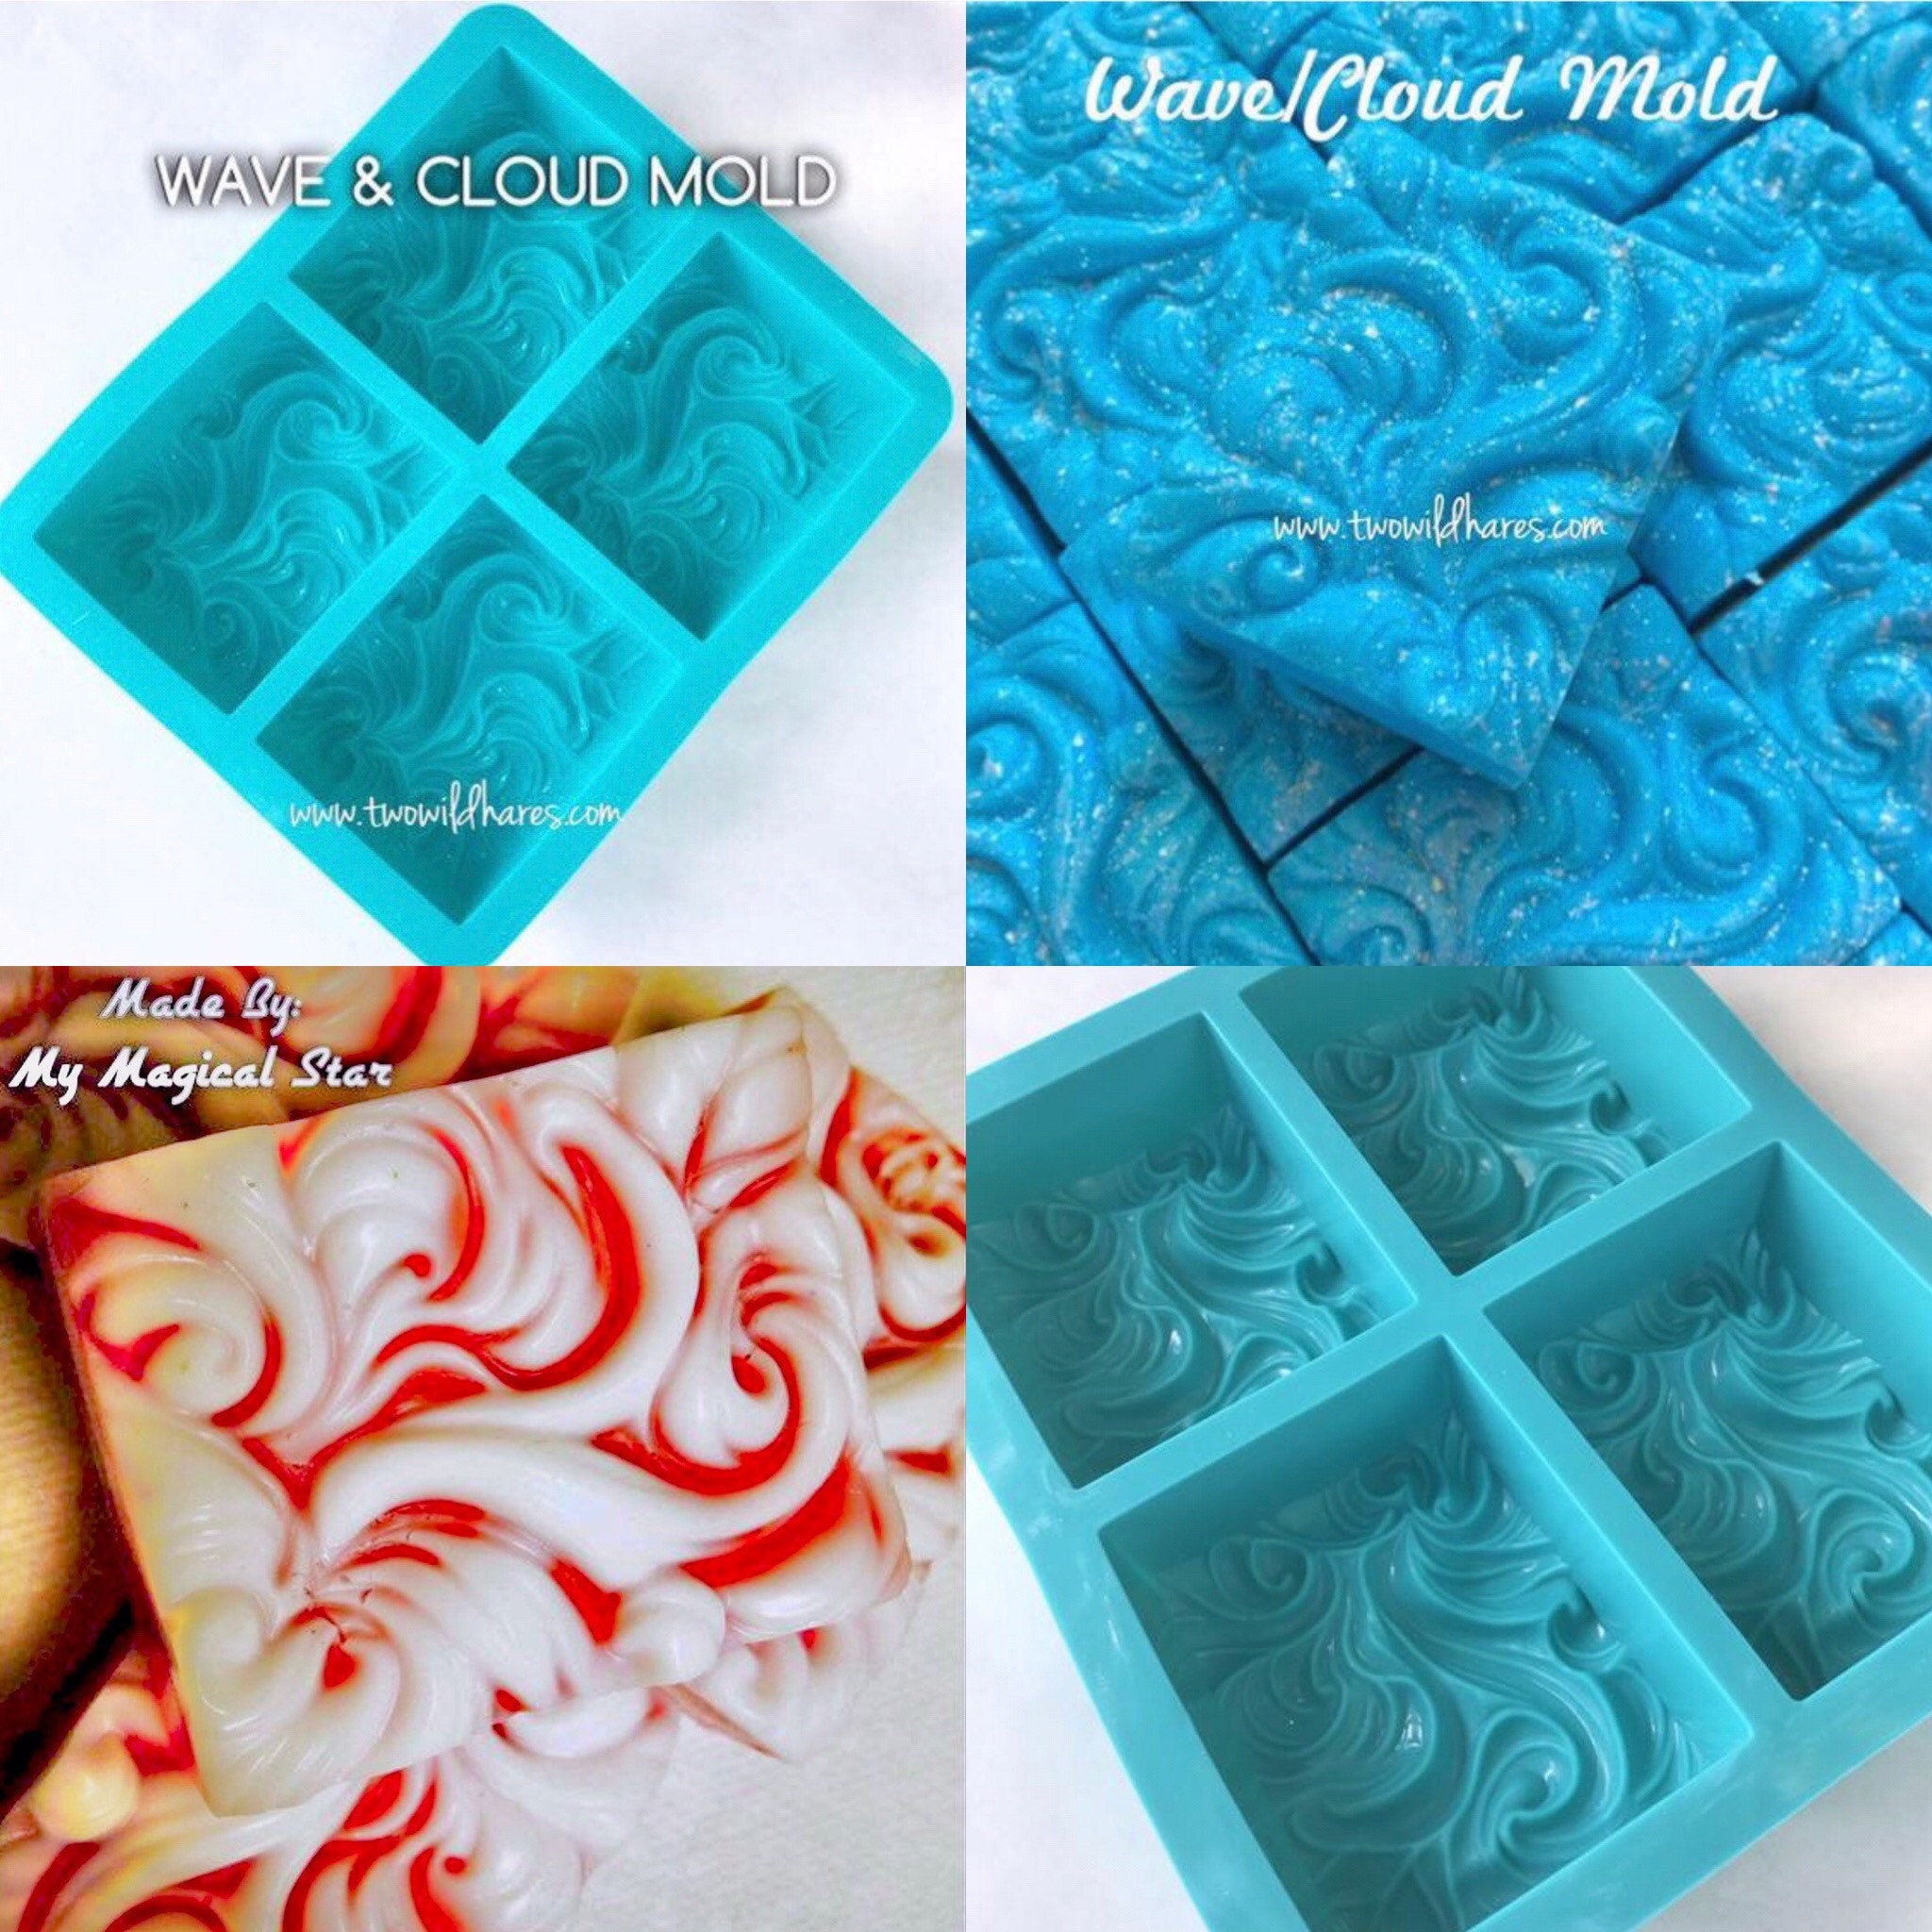  2 Pack 3D Silicone Massage Bar Soap Molds, 4 Cavities